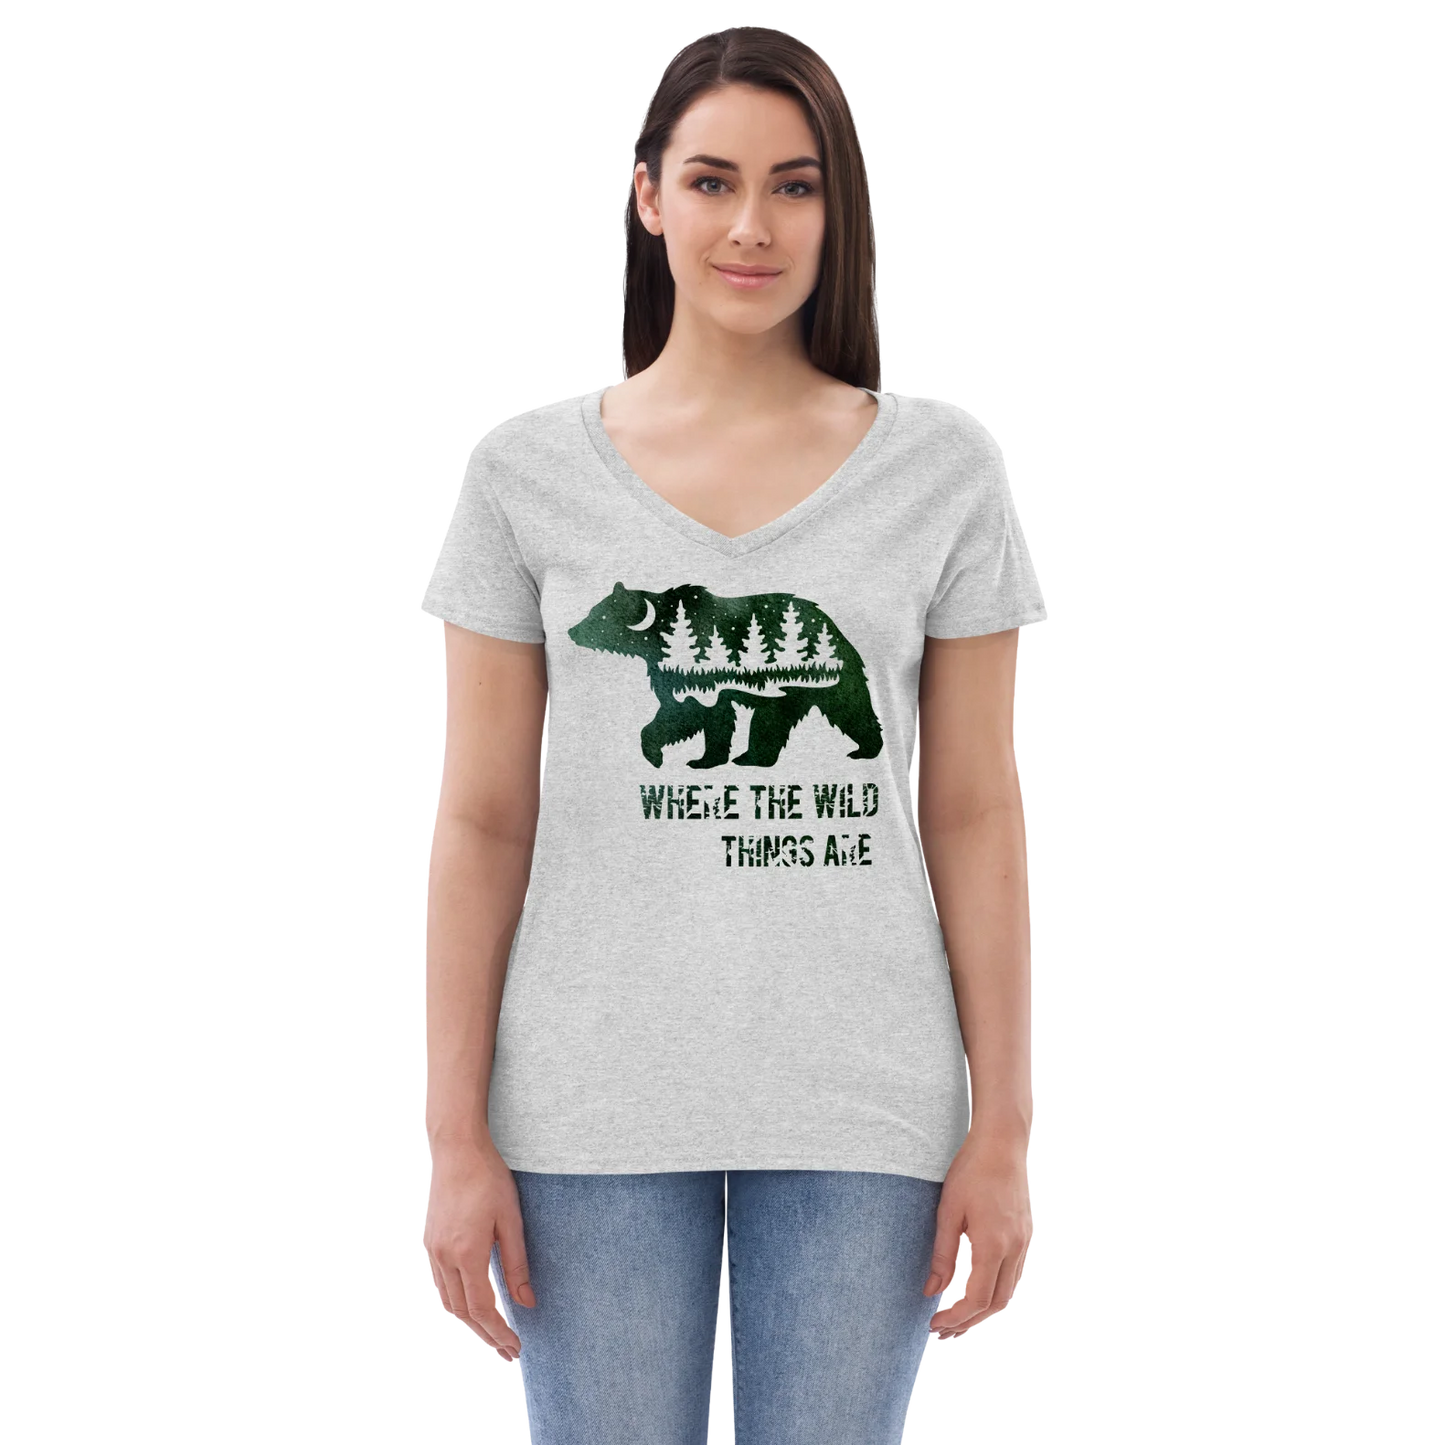 "Where the Wild Things Are" Recycled V-neck T-shirt